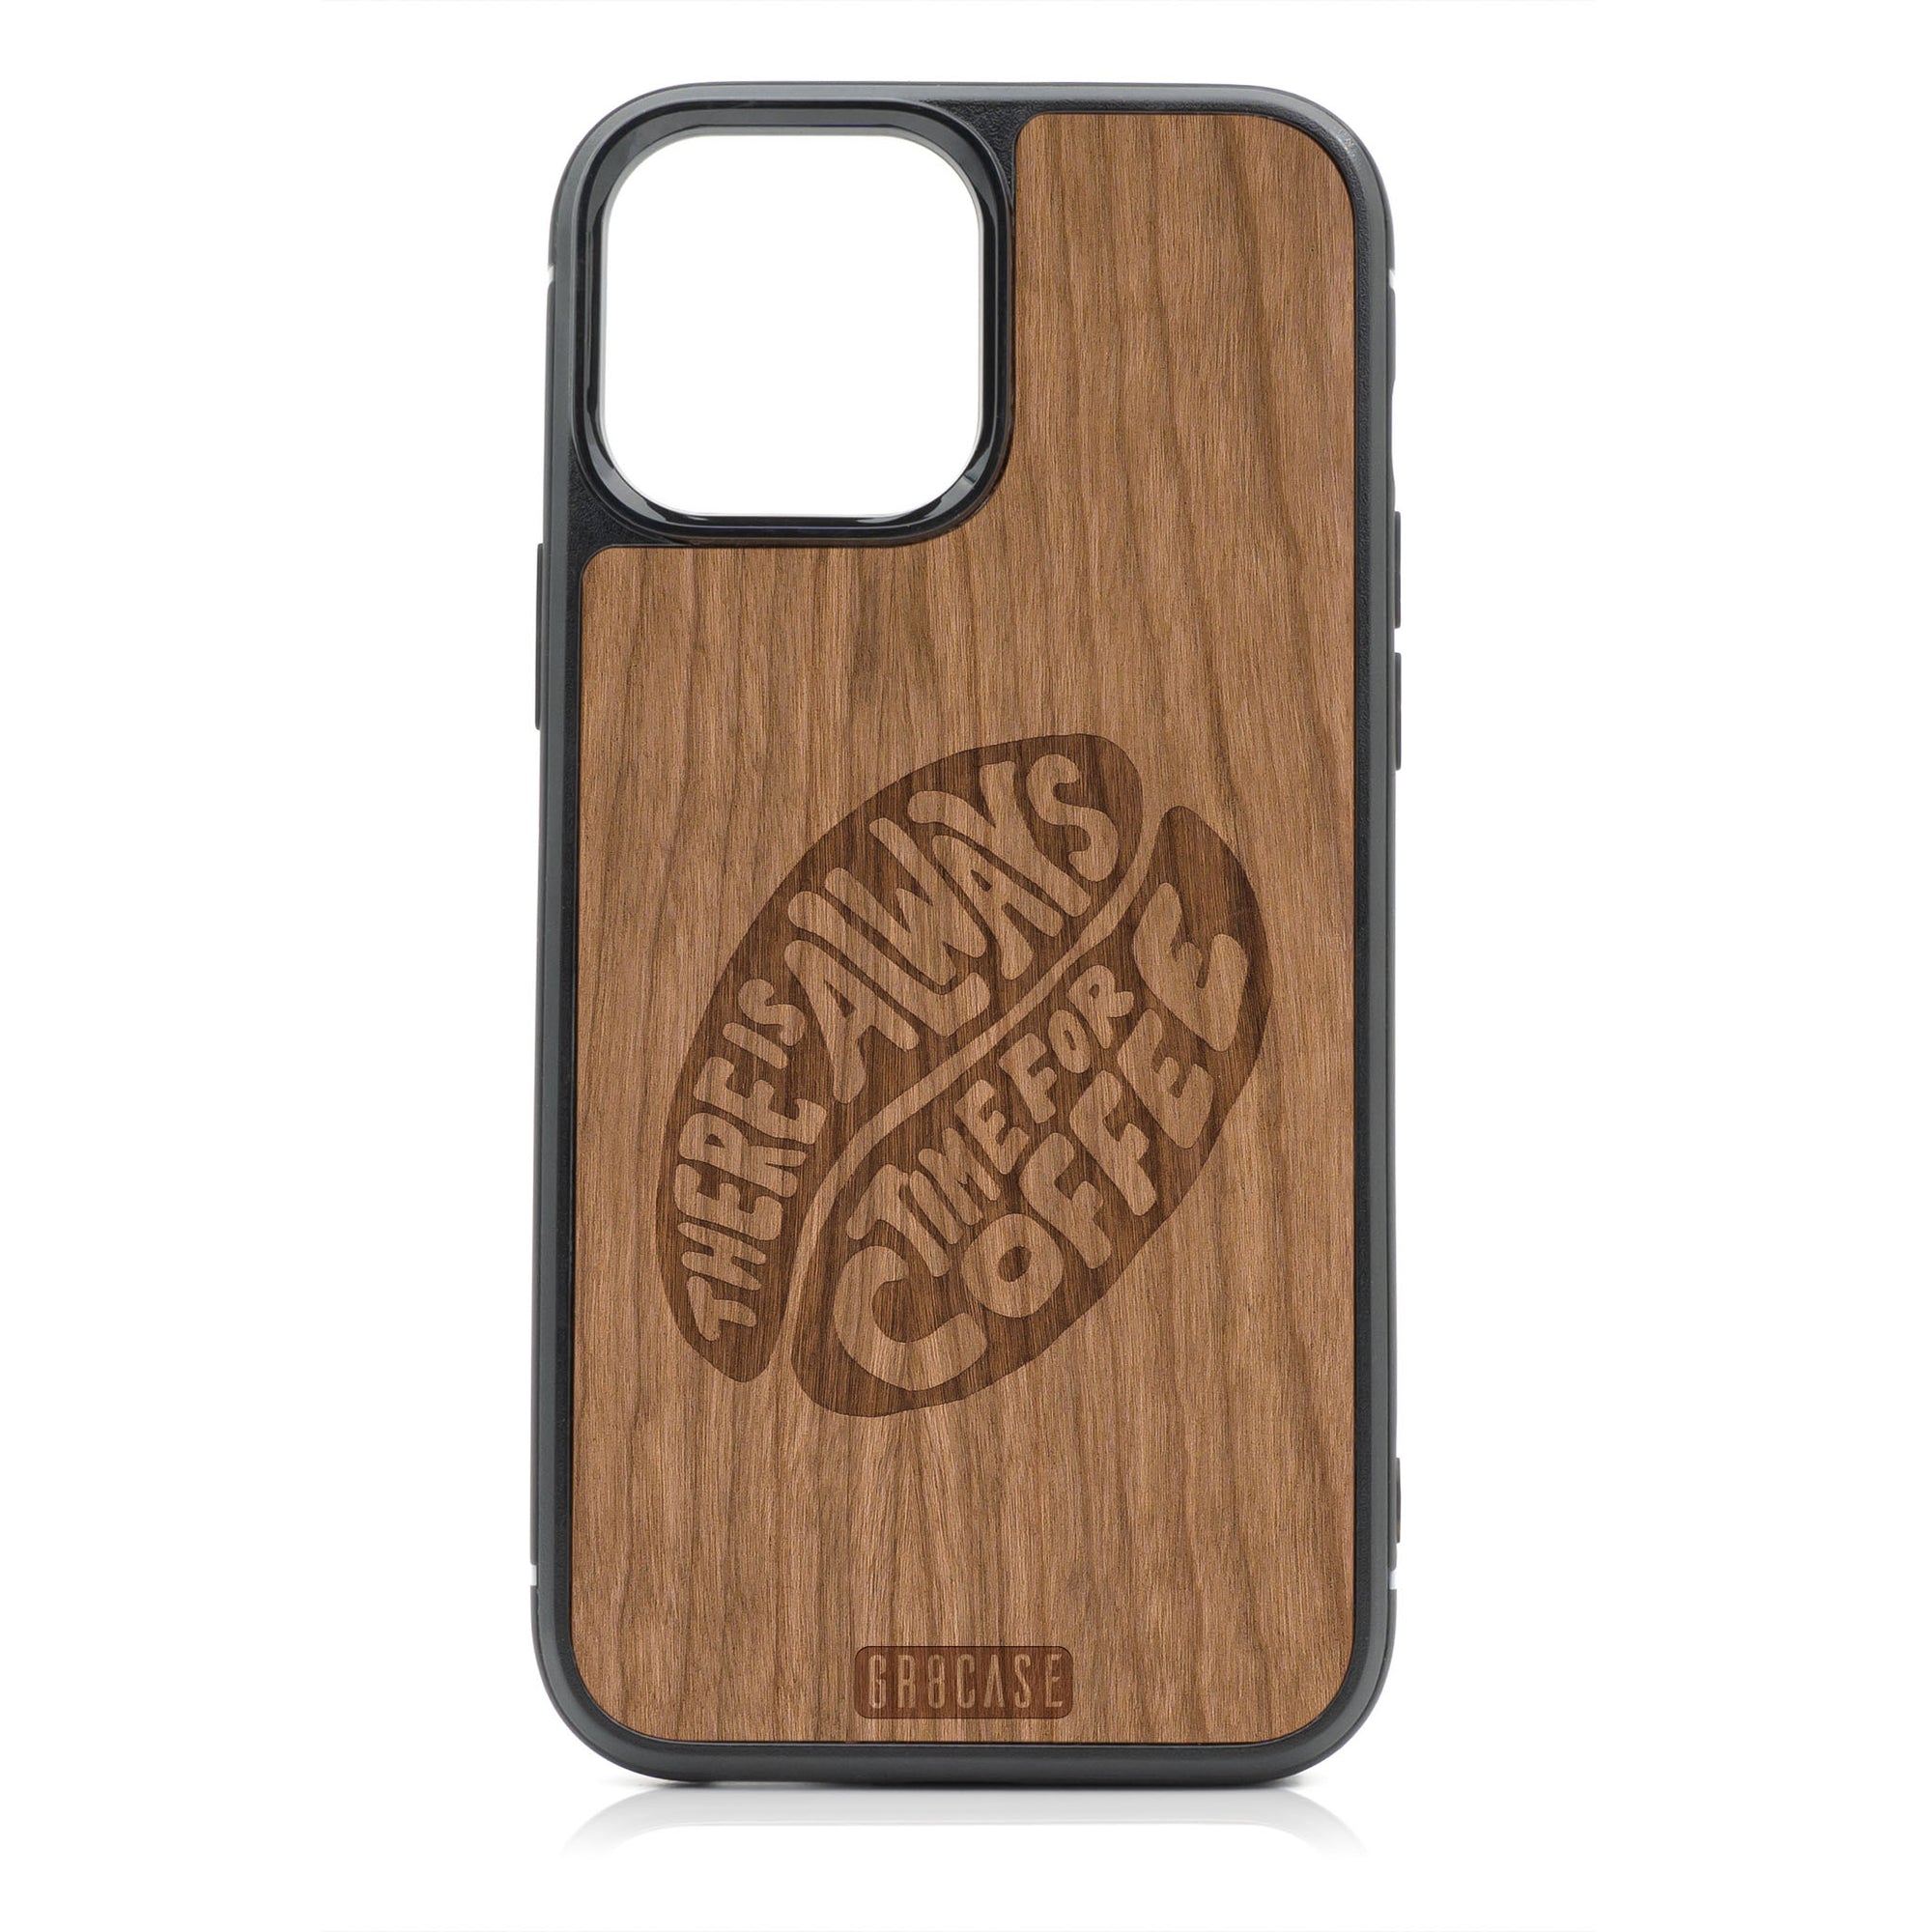 There Is Always Time For Coffee Design Wood Case For iPhone 13 Pro Max